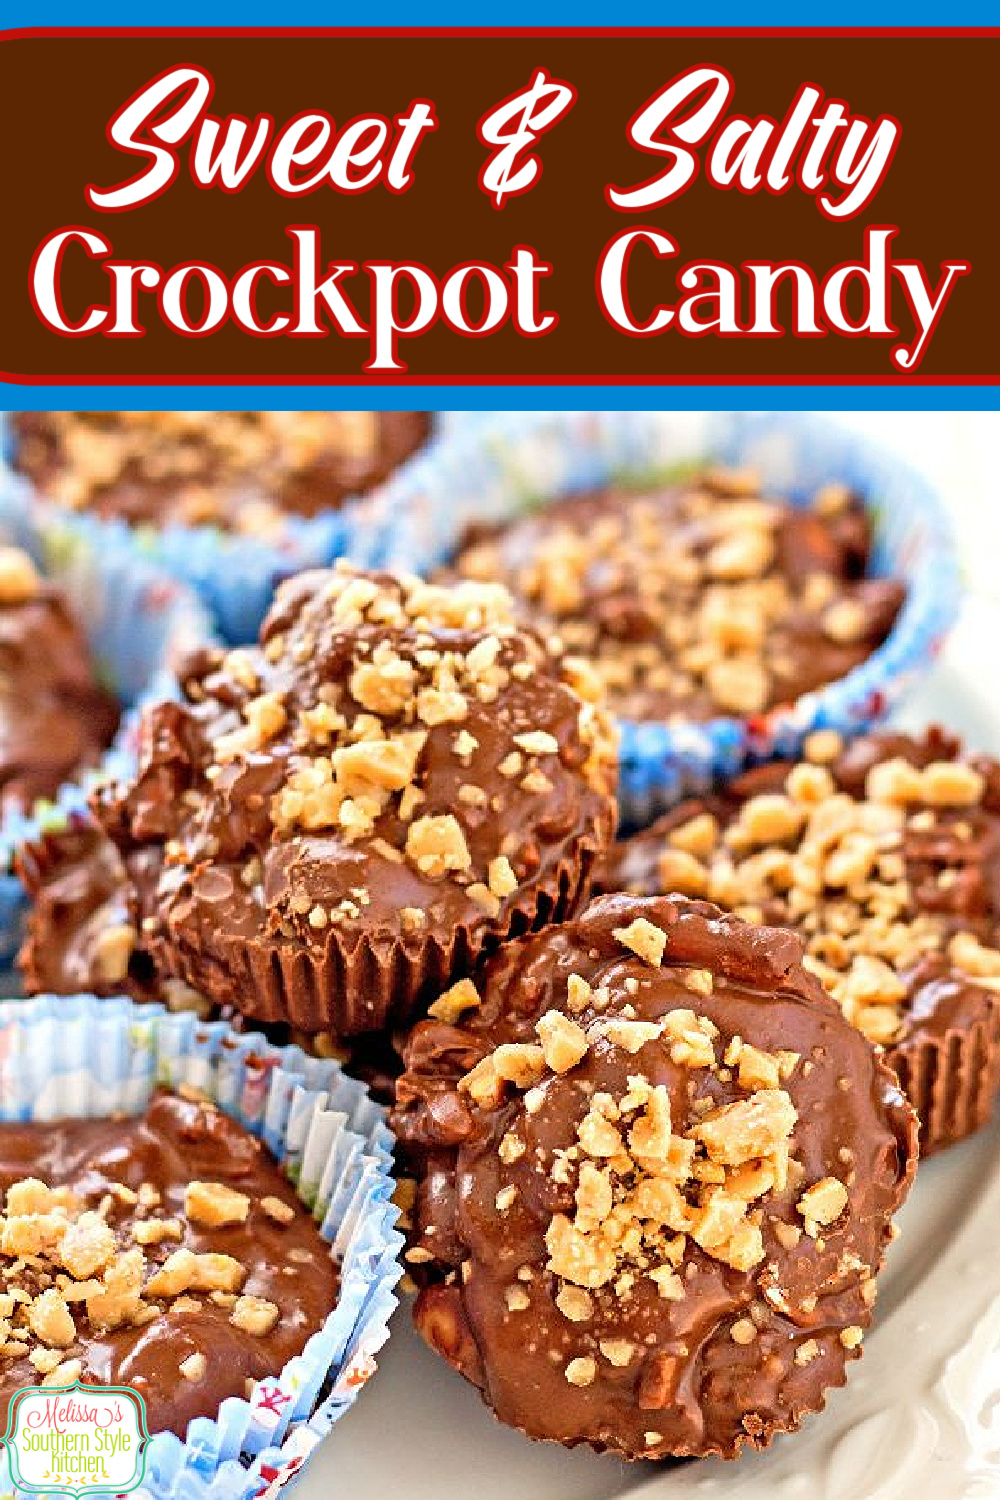 Sweet and Salty Crock Pot Candy is a delicious option for holiday snacking and gift giving #crockpotcandy #candy #sweetandsalty #slowcookercandy #candyrecipes #christmascandy #holidayrecipes #chocolate #desserts #dessertfoodrecipes #dessertrecipes #southernrecipes #southernfood #melissassouthernstylekitchen via @melissasssk